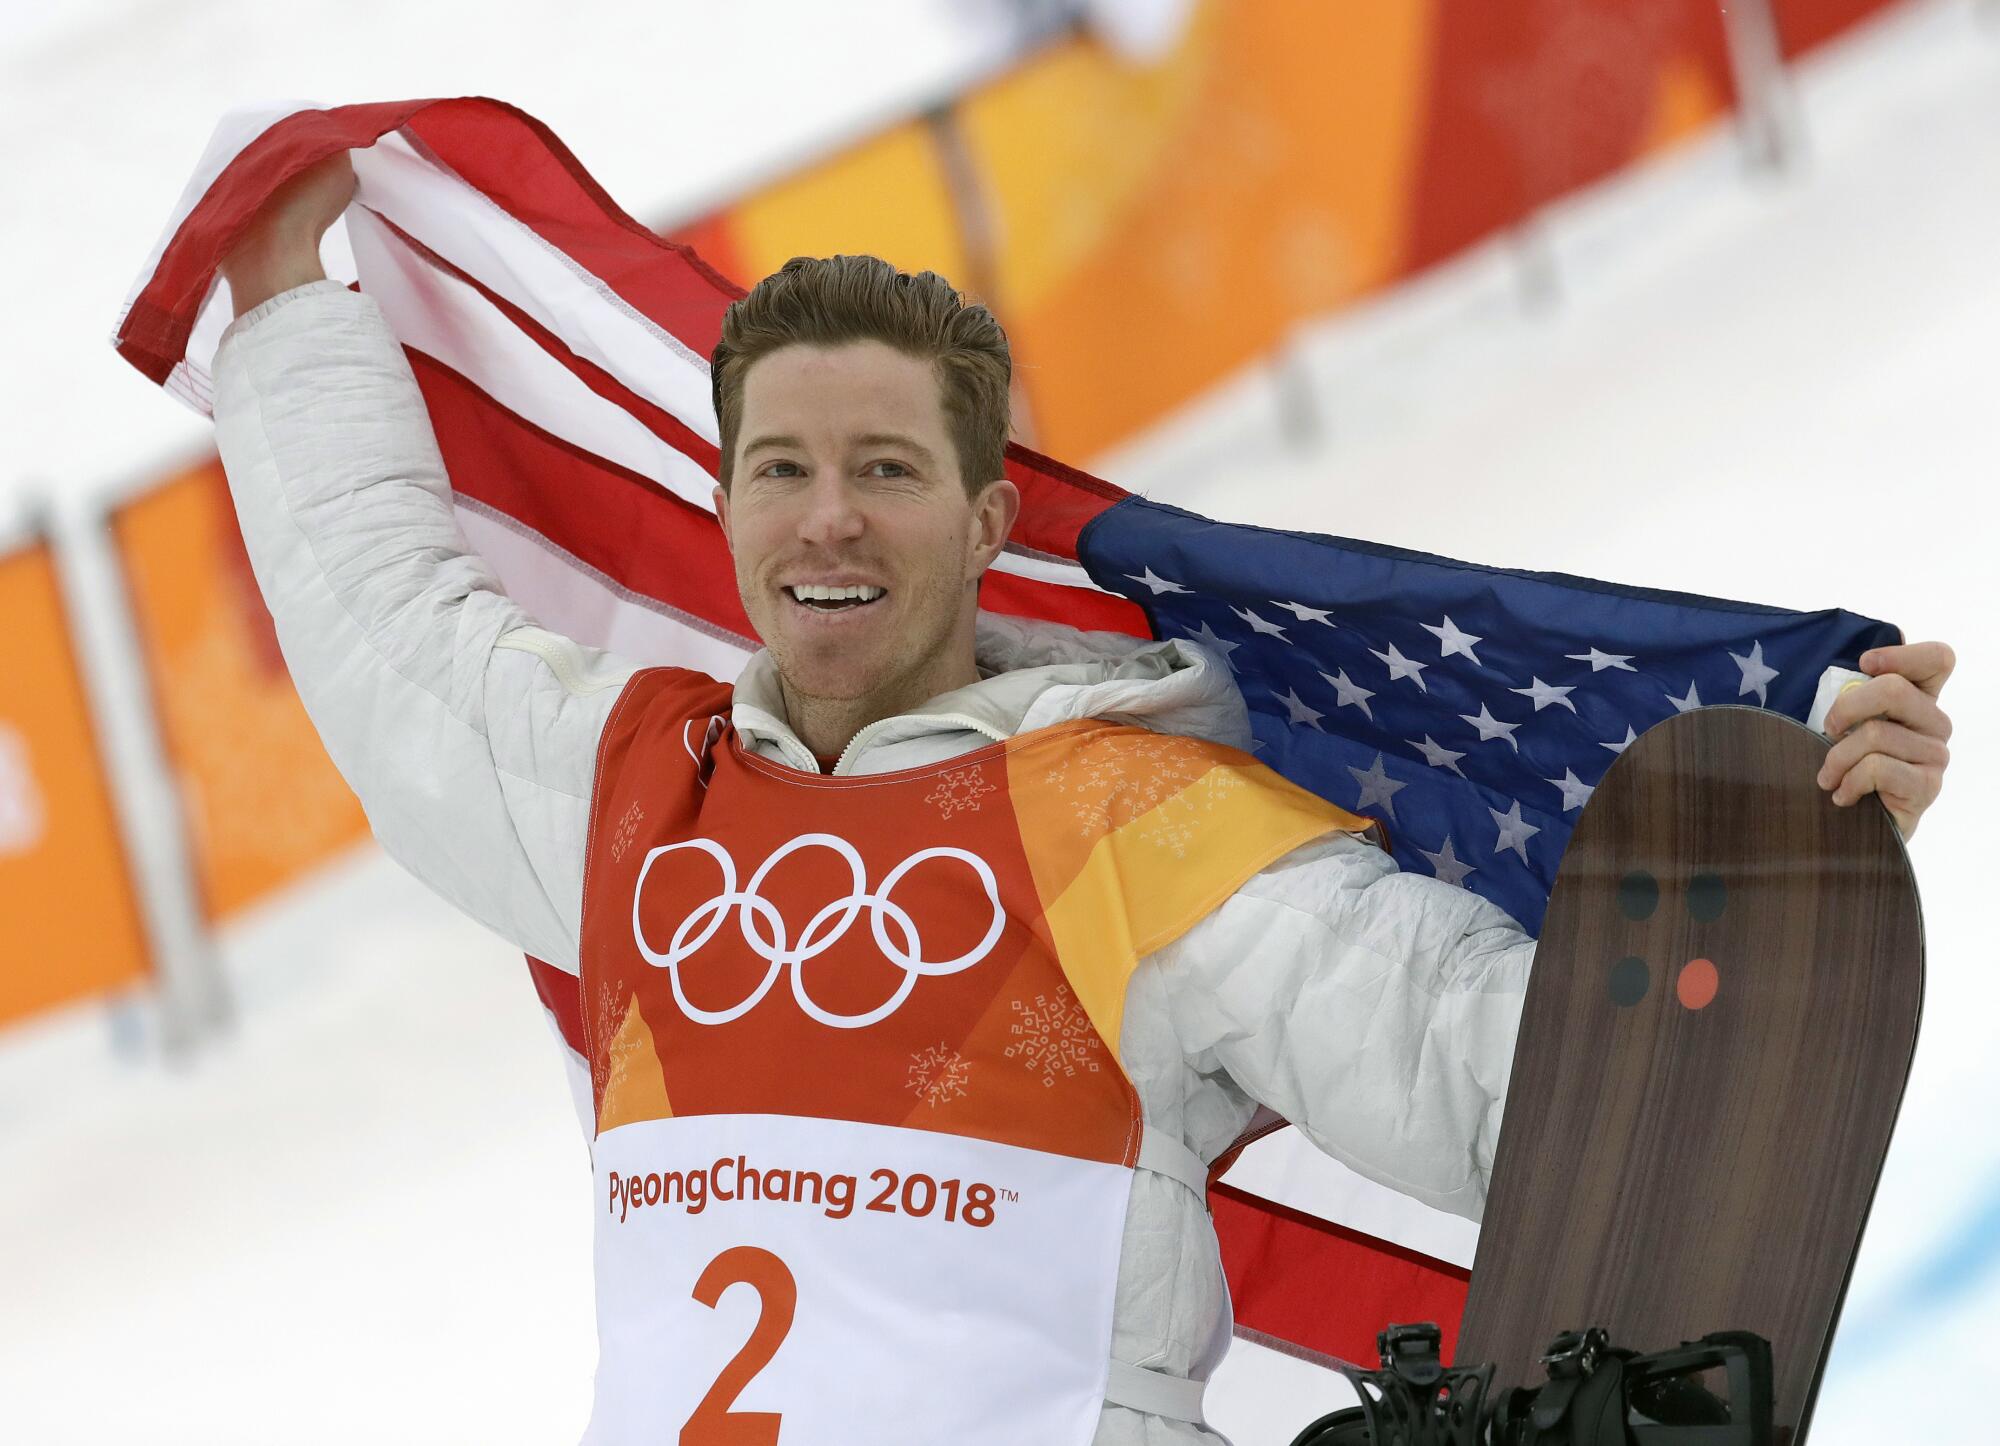 Shaun White holds a U.S. flag at the 2018 Olympics.